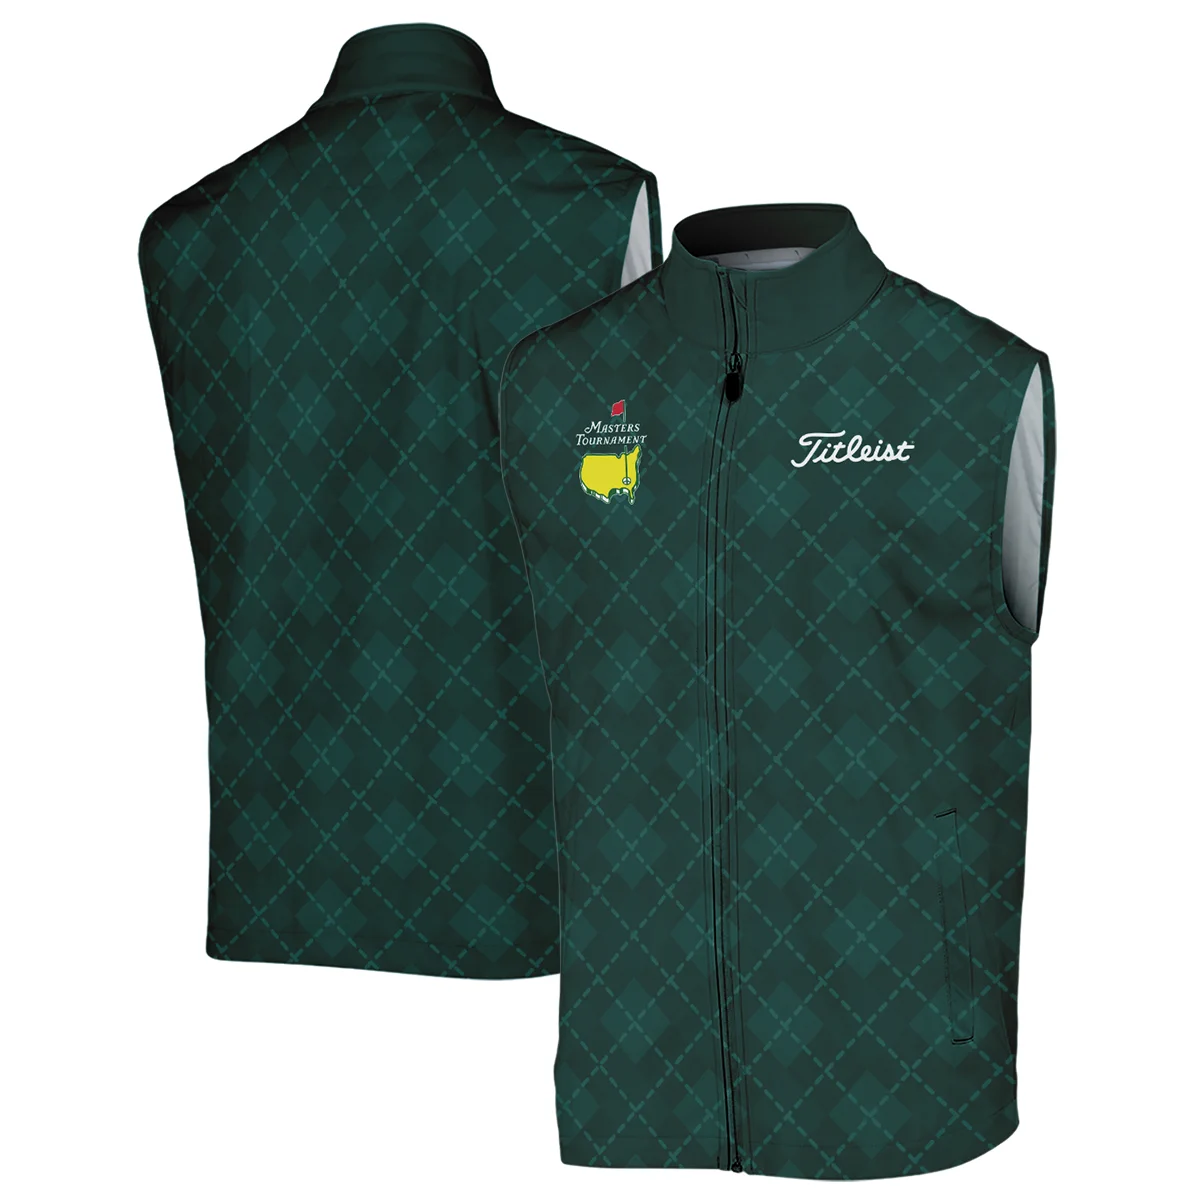 Golf Geometric Pattern Green Masters Tournament Titleist Polo Shirt Style Classic Polo Shirt For Men